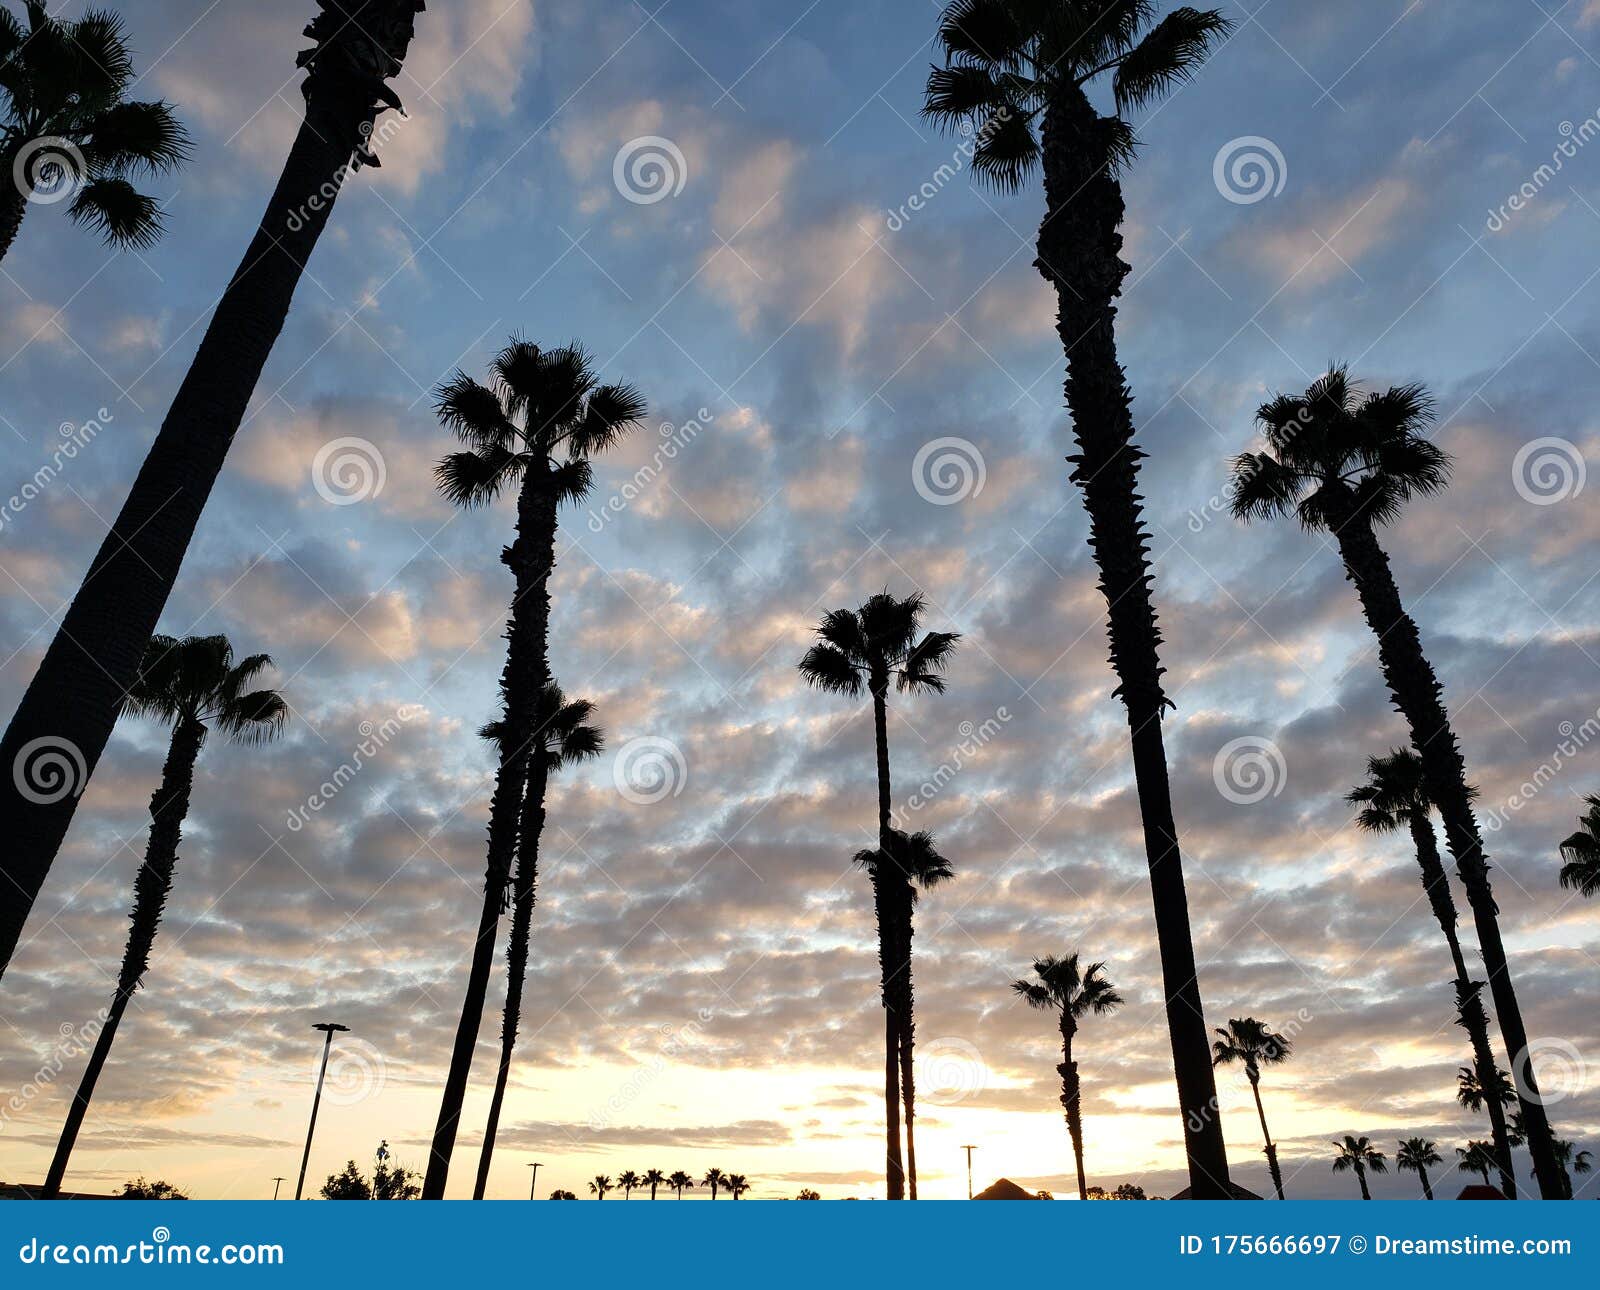 Cloudy Day Giant Palm Trees Beautiful Sunset Stock Image - Image of ...